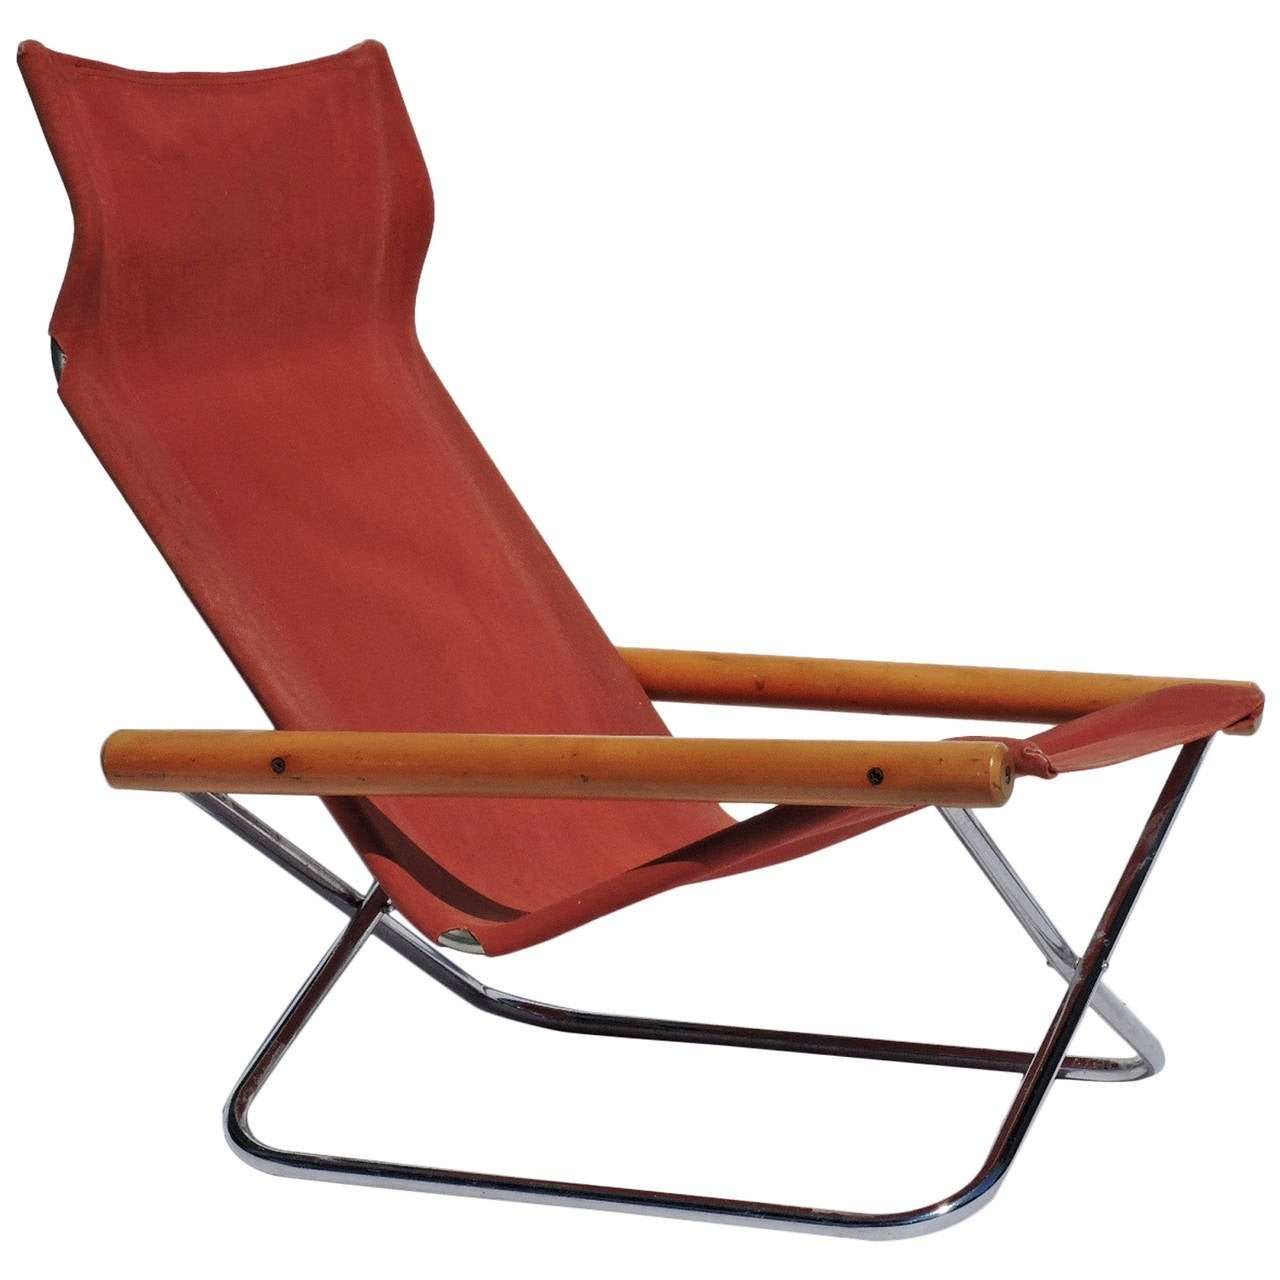 Ny folding chair by takeshi nii japan 1958 at 1stdibs